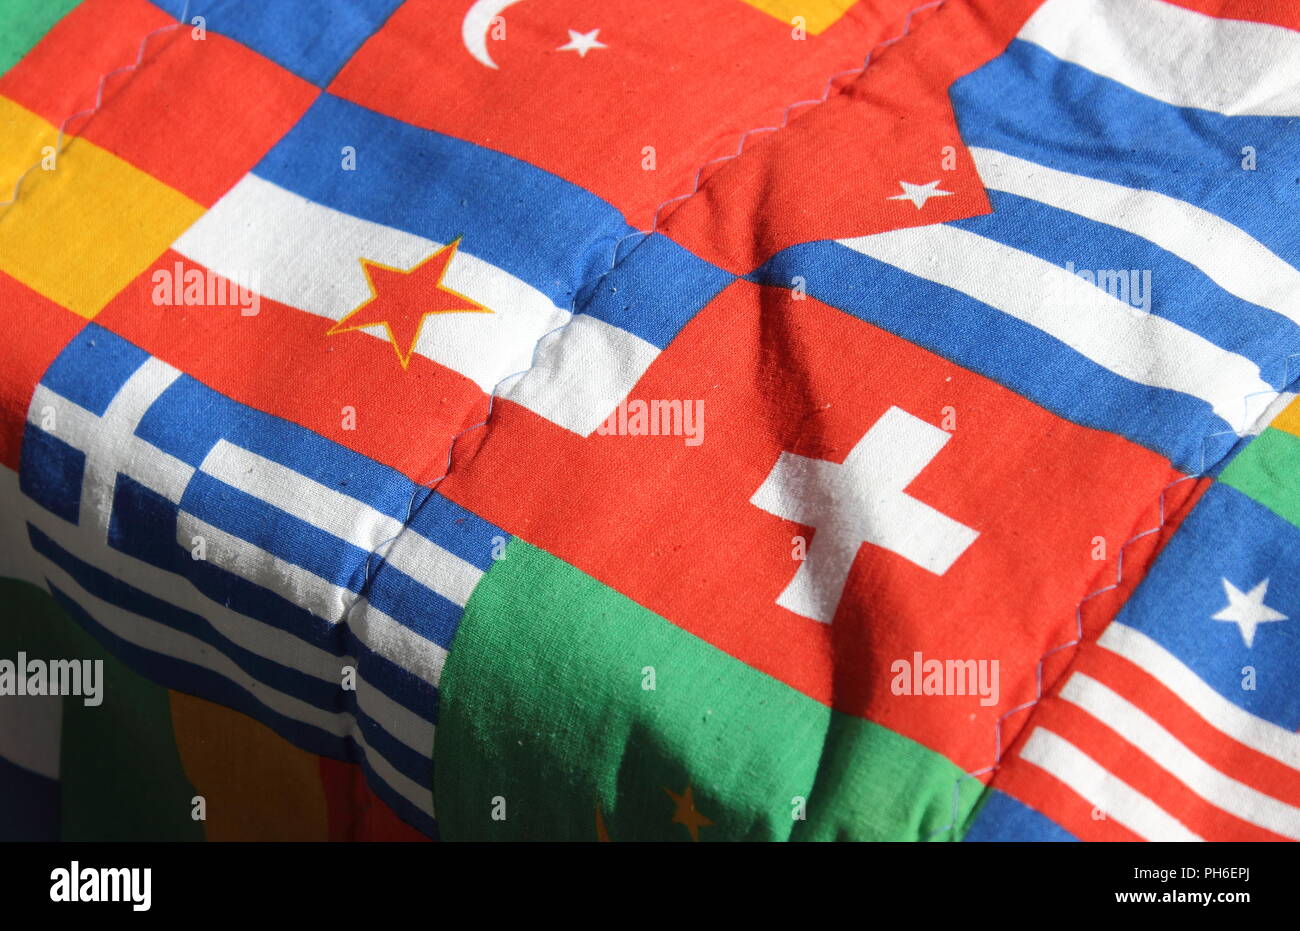 Yugoslavian flag amongst other world flags on an old flag patterned sleeping bag. Stock Photo